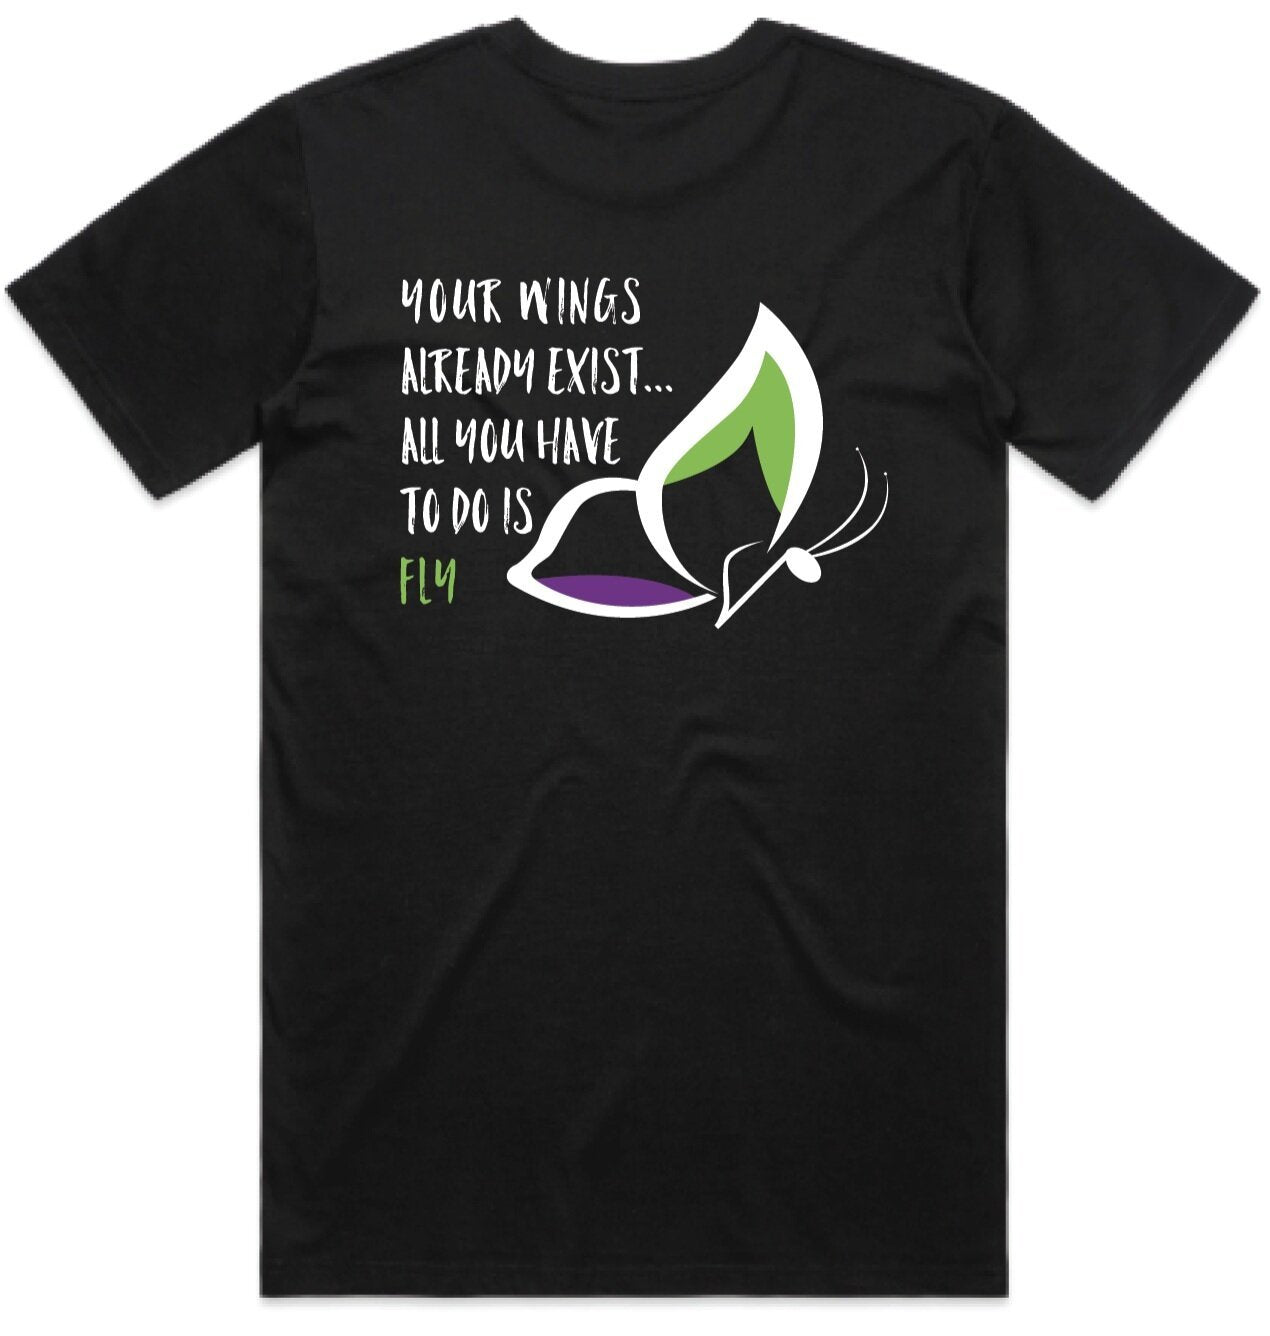 Green Room "All You Have To Do Is Fly" Tee